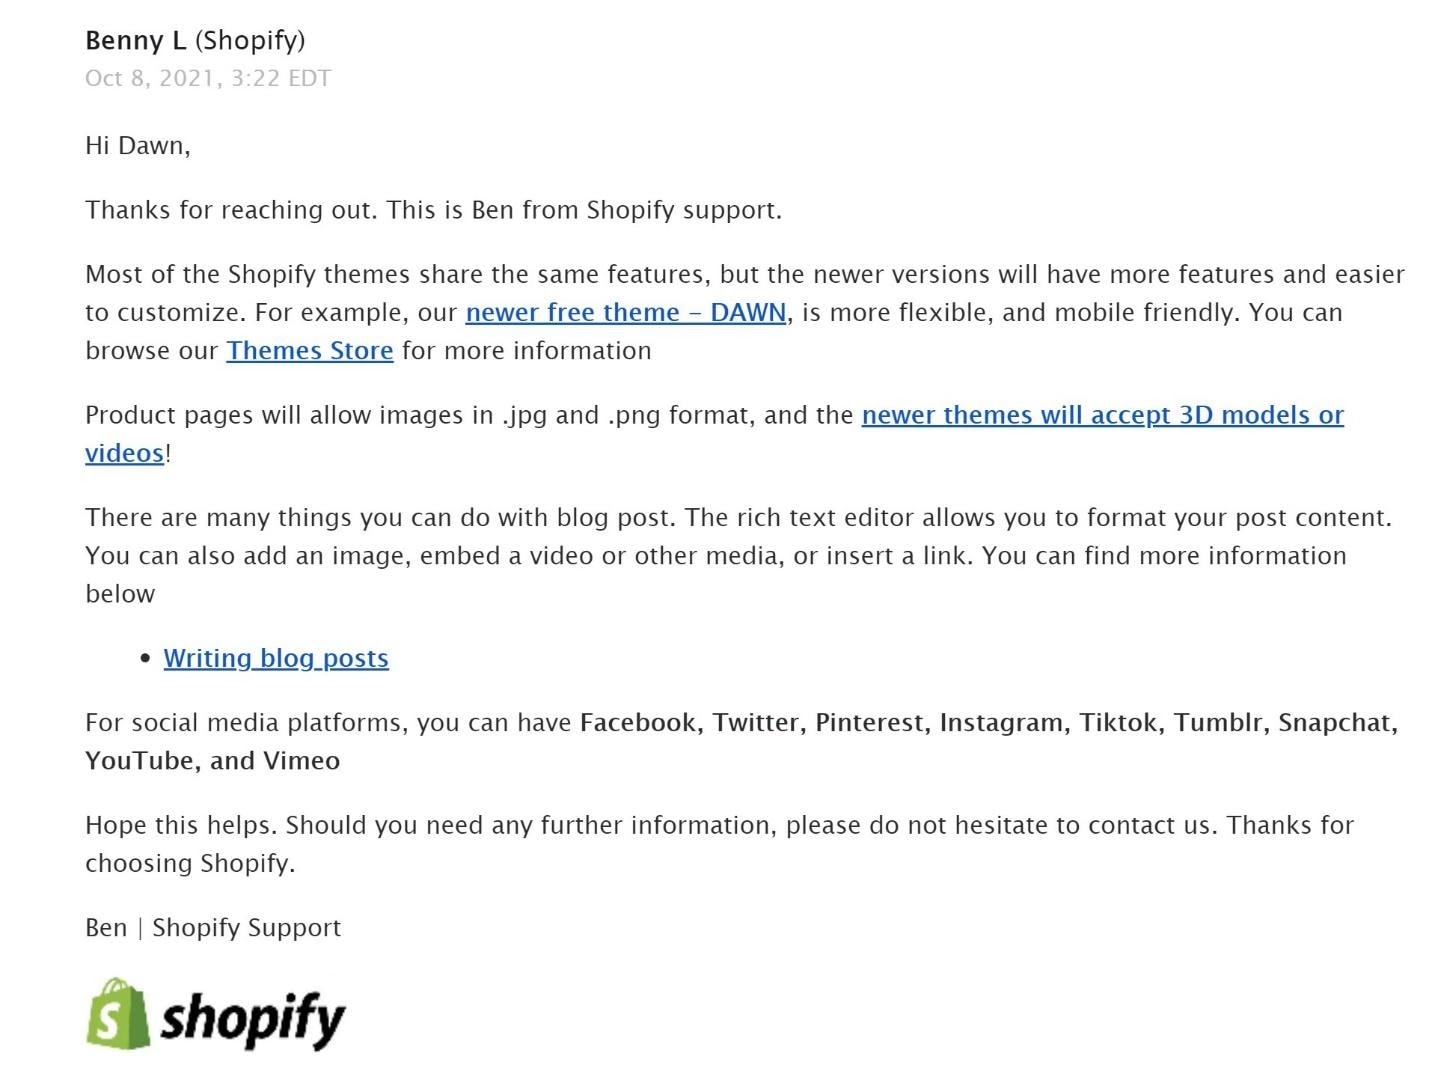 shopify-email-support-response